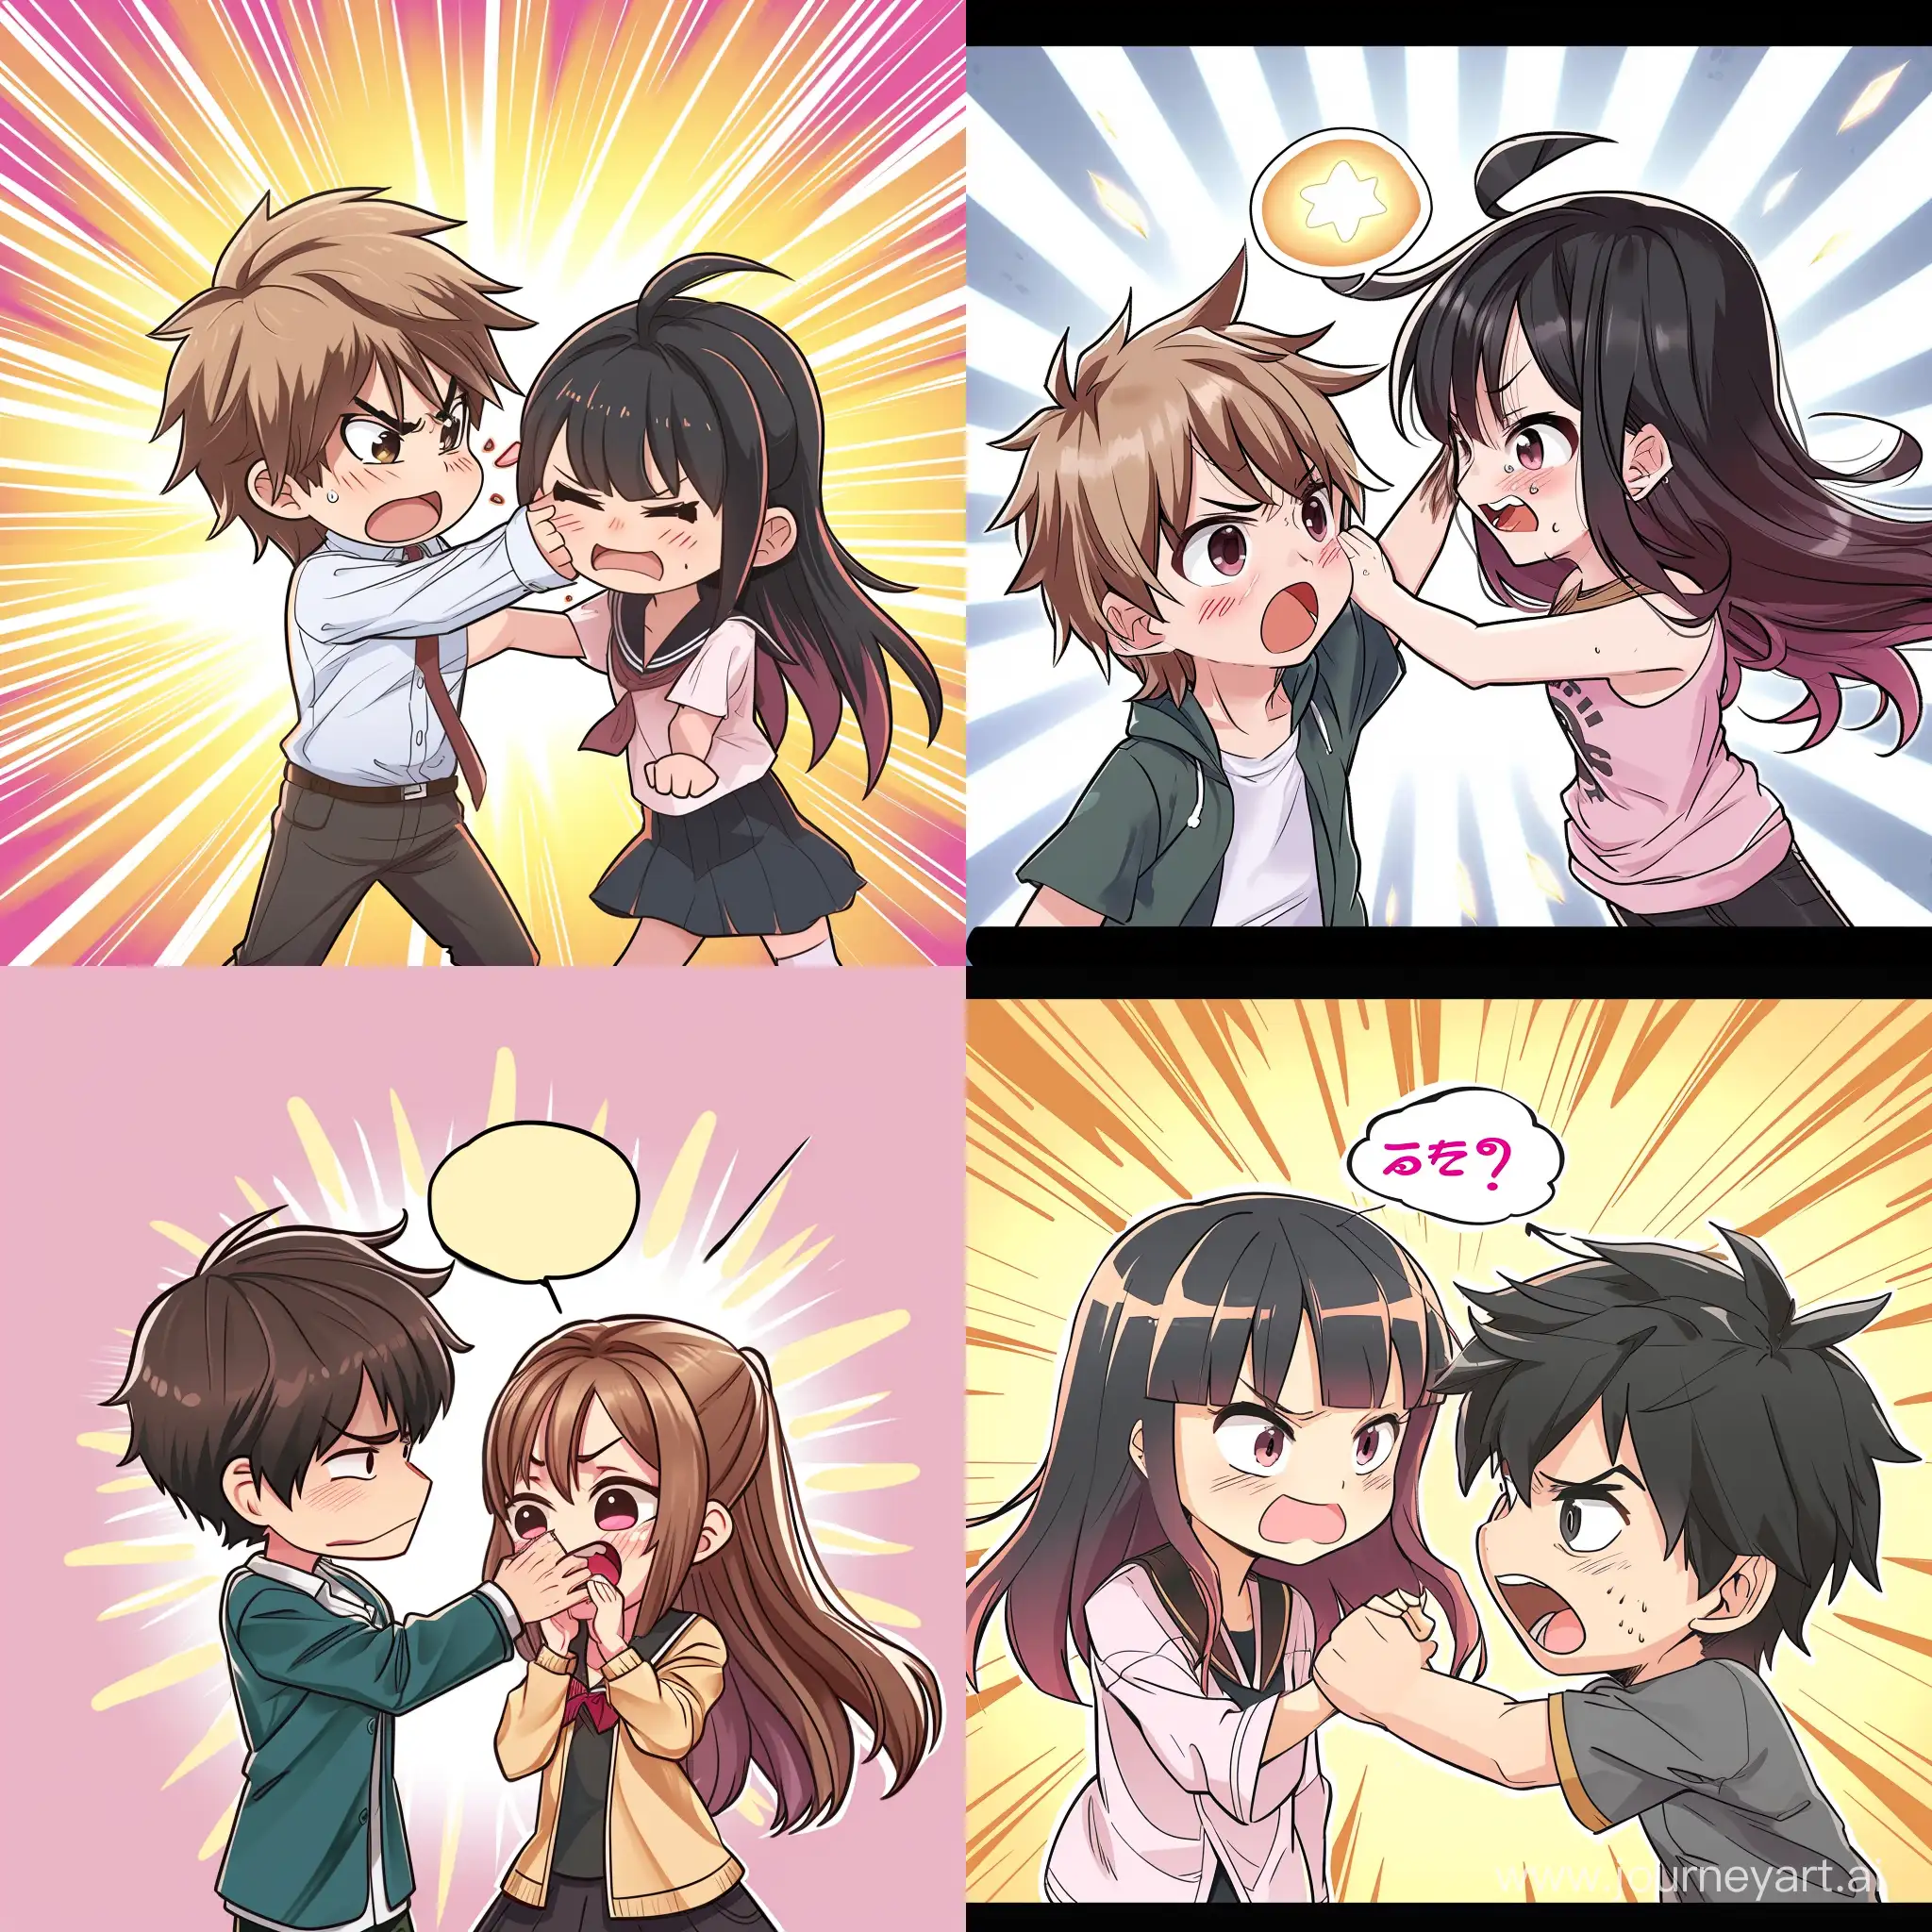 Chibi-Style-Girl-Slapping-Boy-with-Motion-Blur